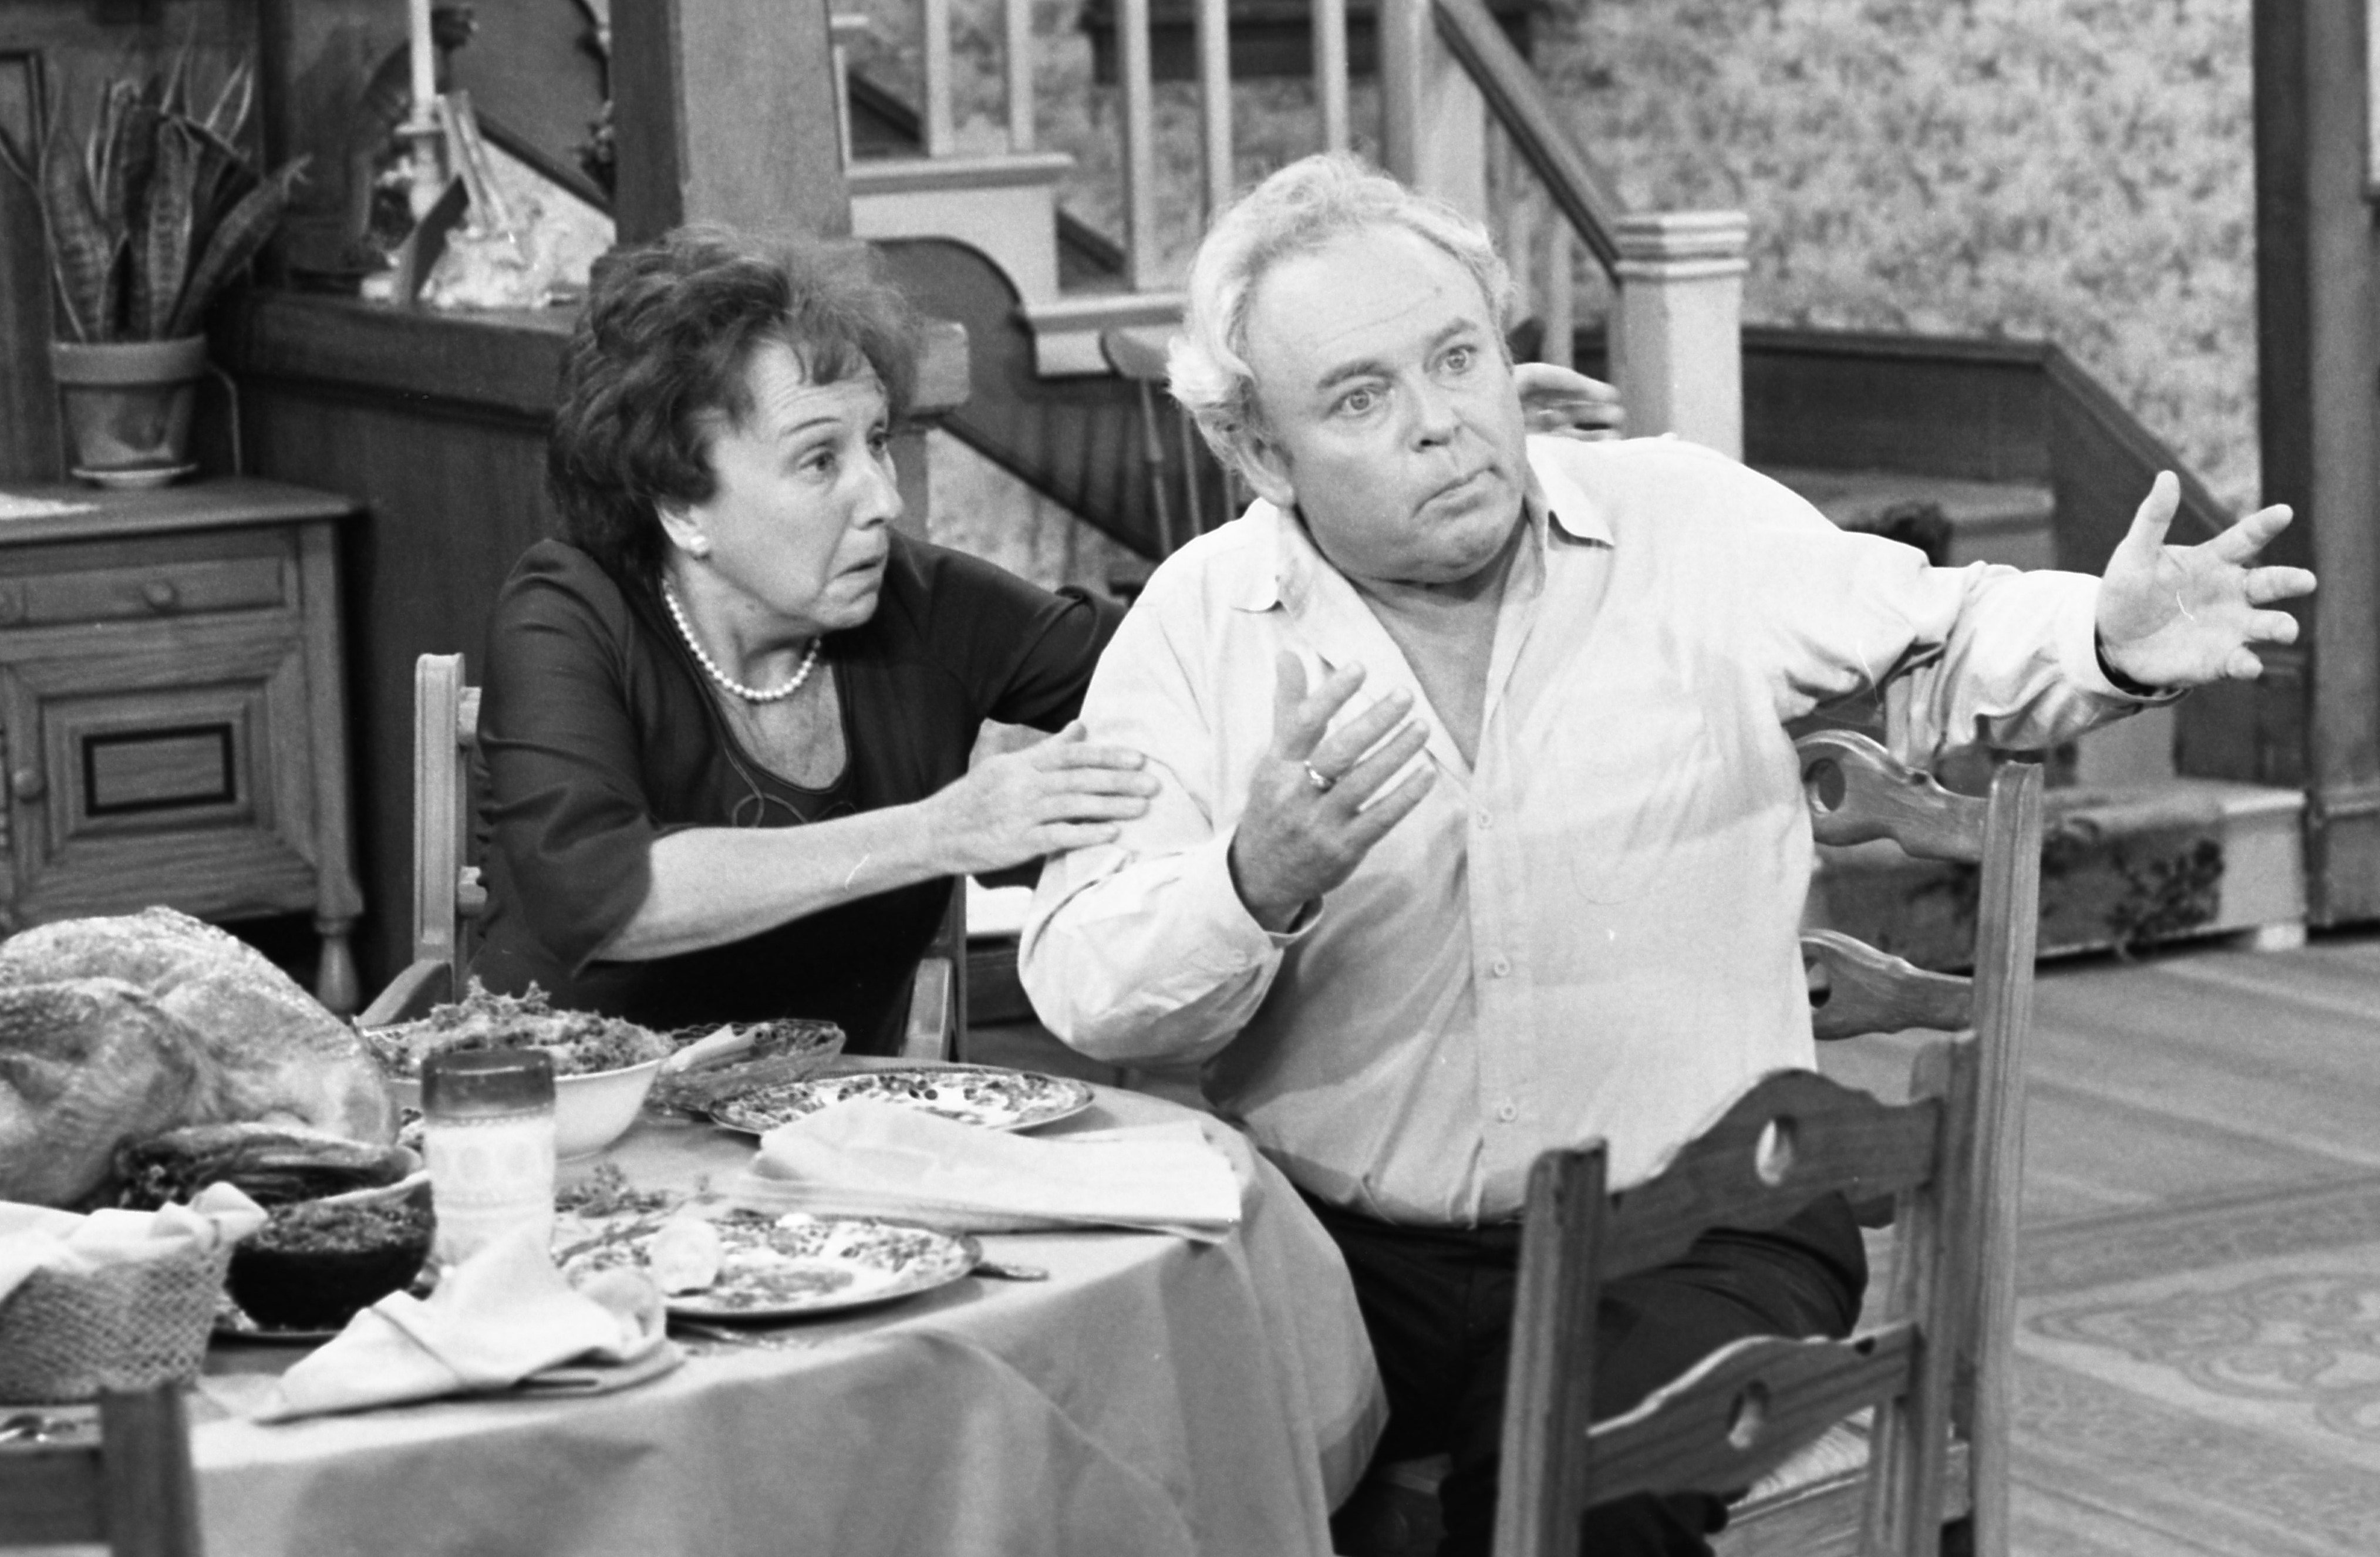 Jean Stapleton and Carroll O'Connor | Ron Eisenberg/Michael Ochs Archives/Getty Images